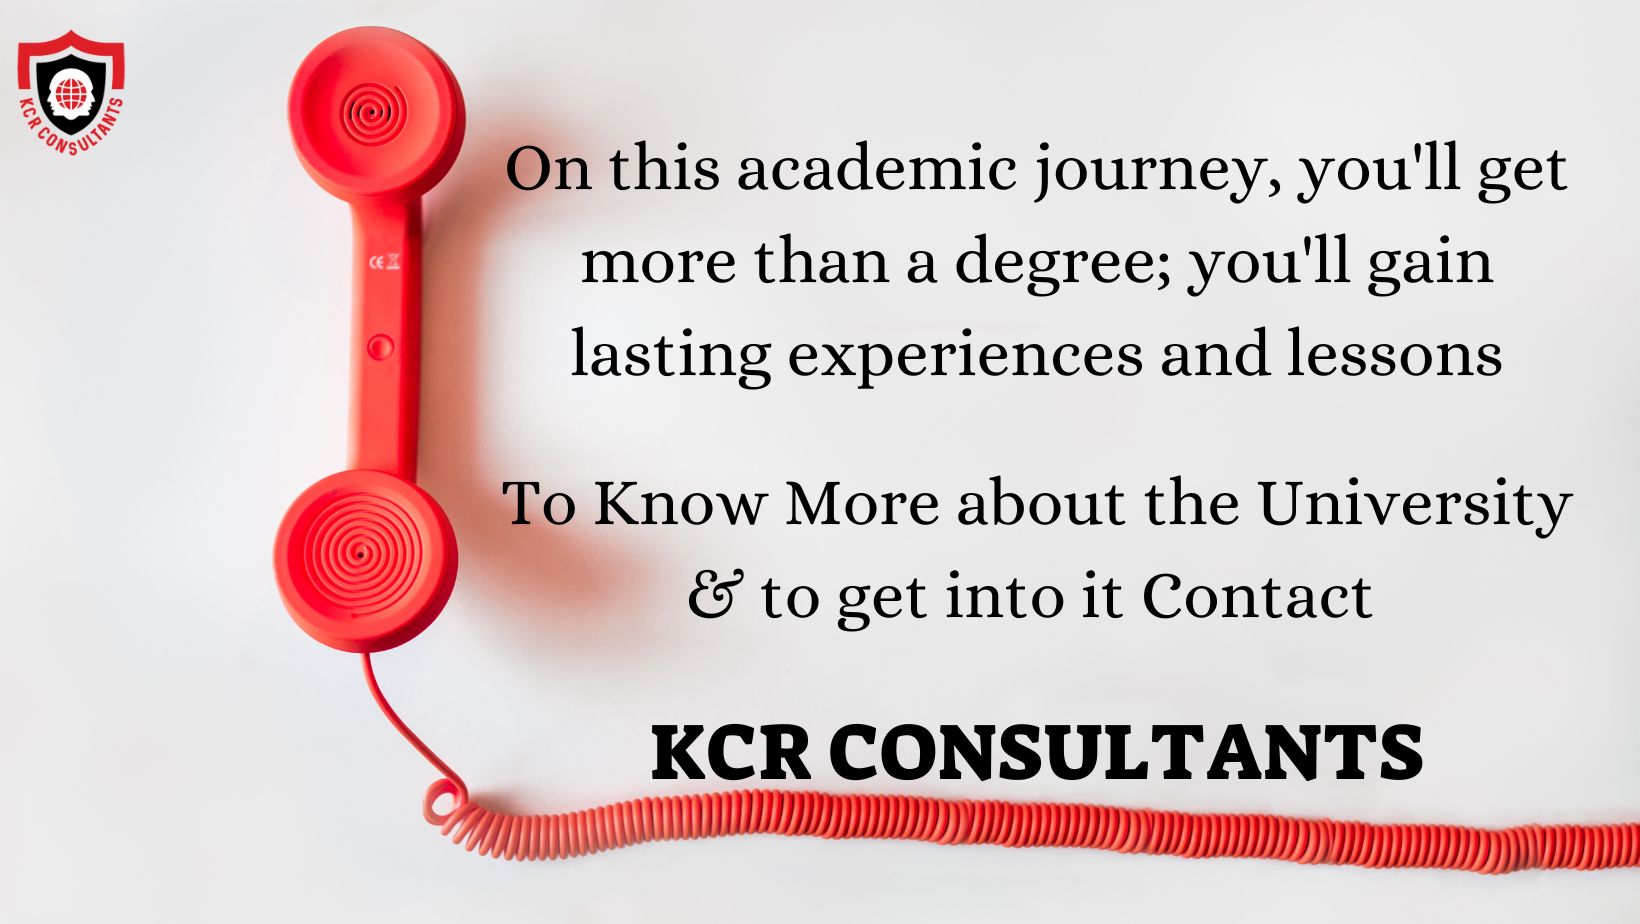 DRESDEN UNIVERSITY OF TECHNOLOGY - KCR CONSULTANTS - Contact us